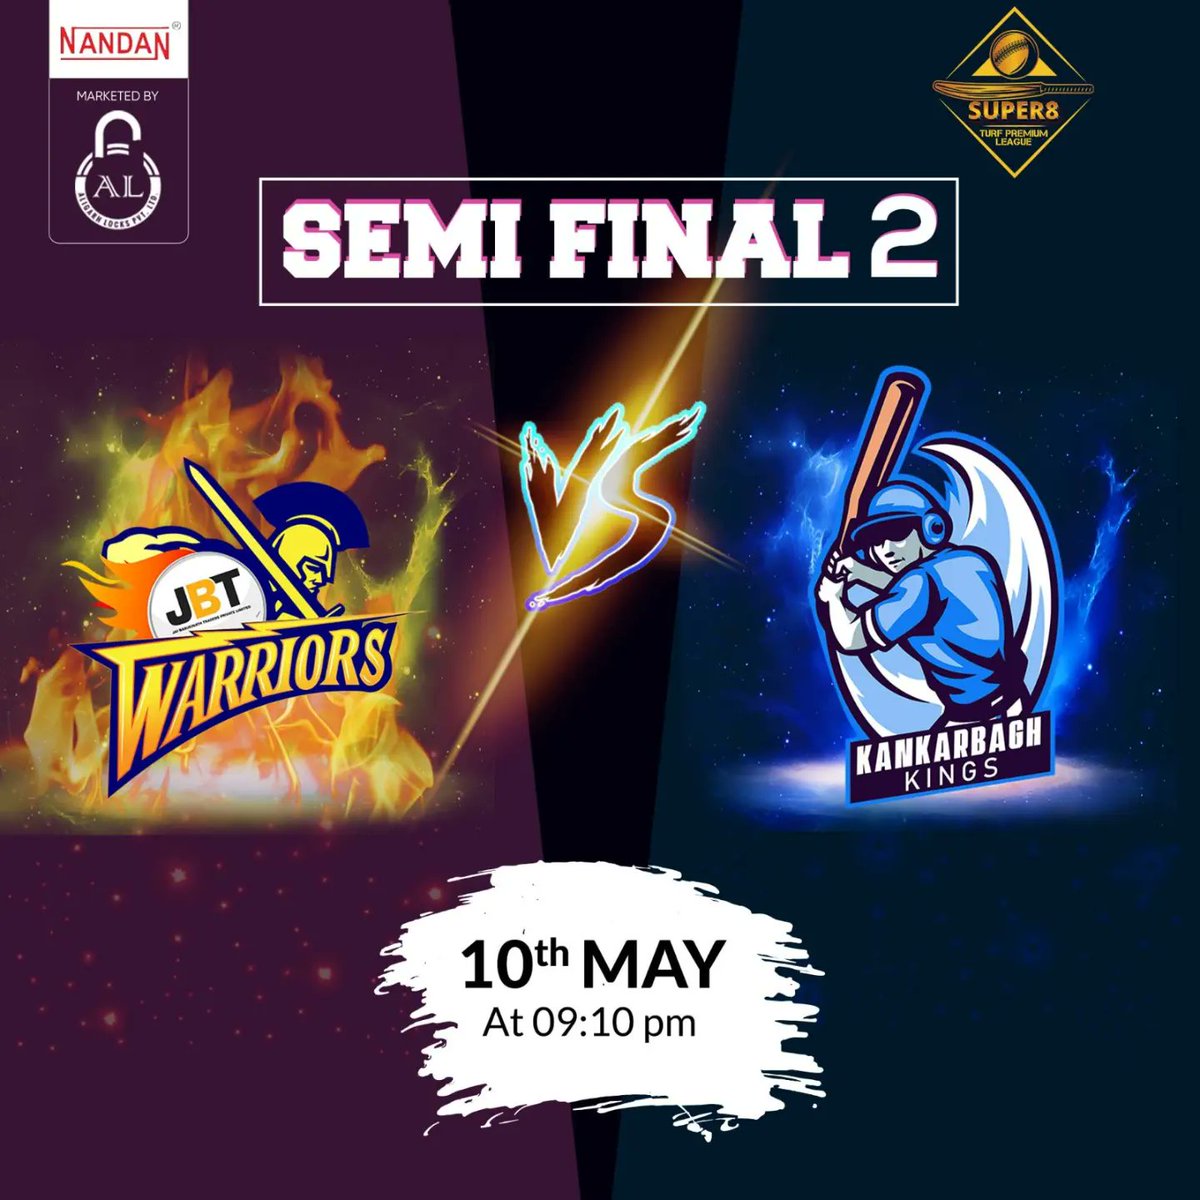 Live it,
Love it,
But Don't forget to watch it!

The Battleground is set!
Because 
The Semi-Finals are On!

Support your Favourite Team
.
.
.
#cricket #boxcricket #turfarena #boxcricketleague